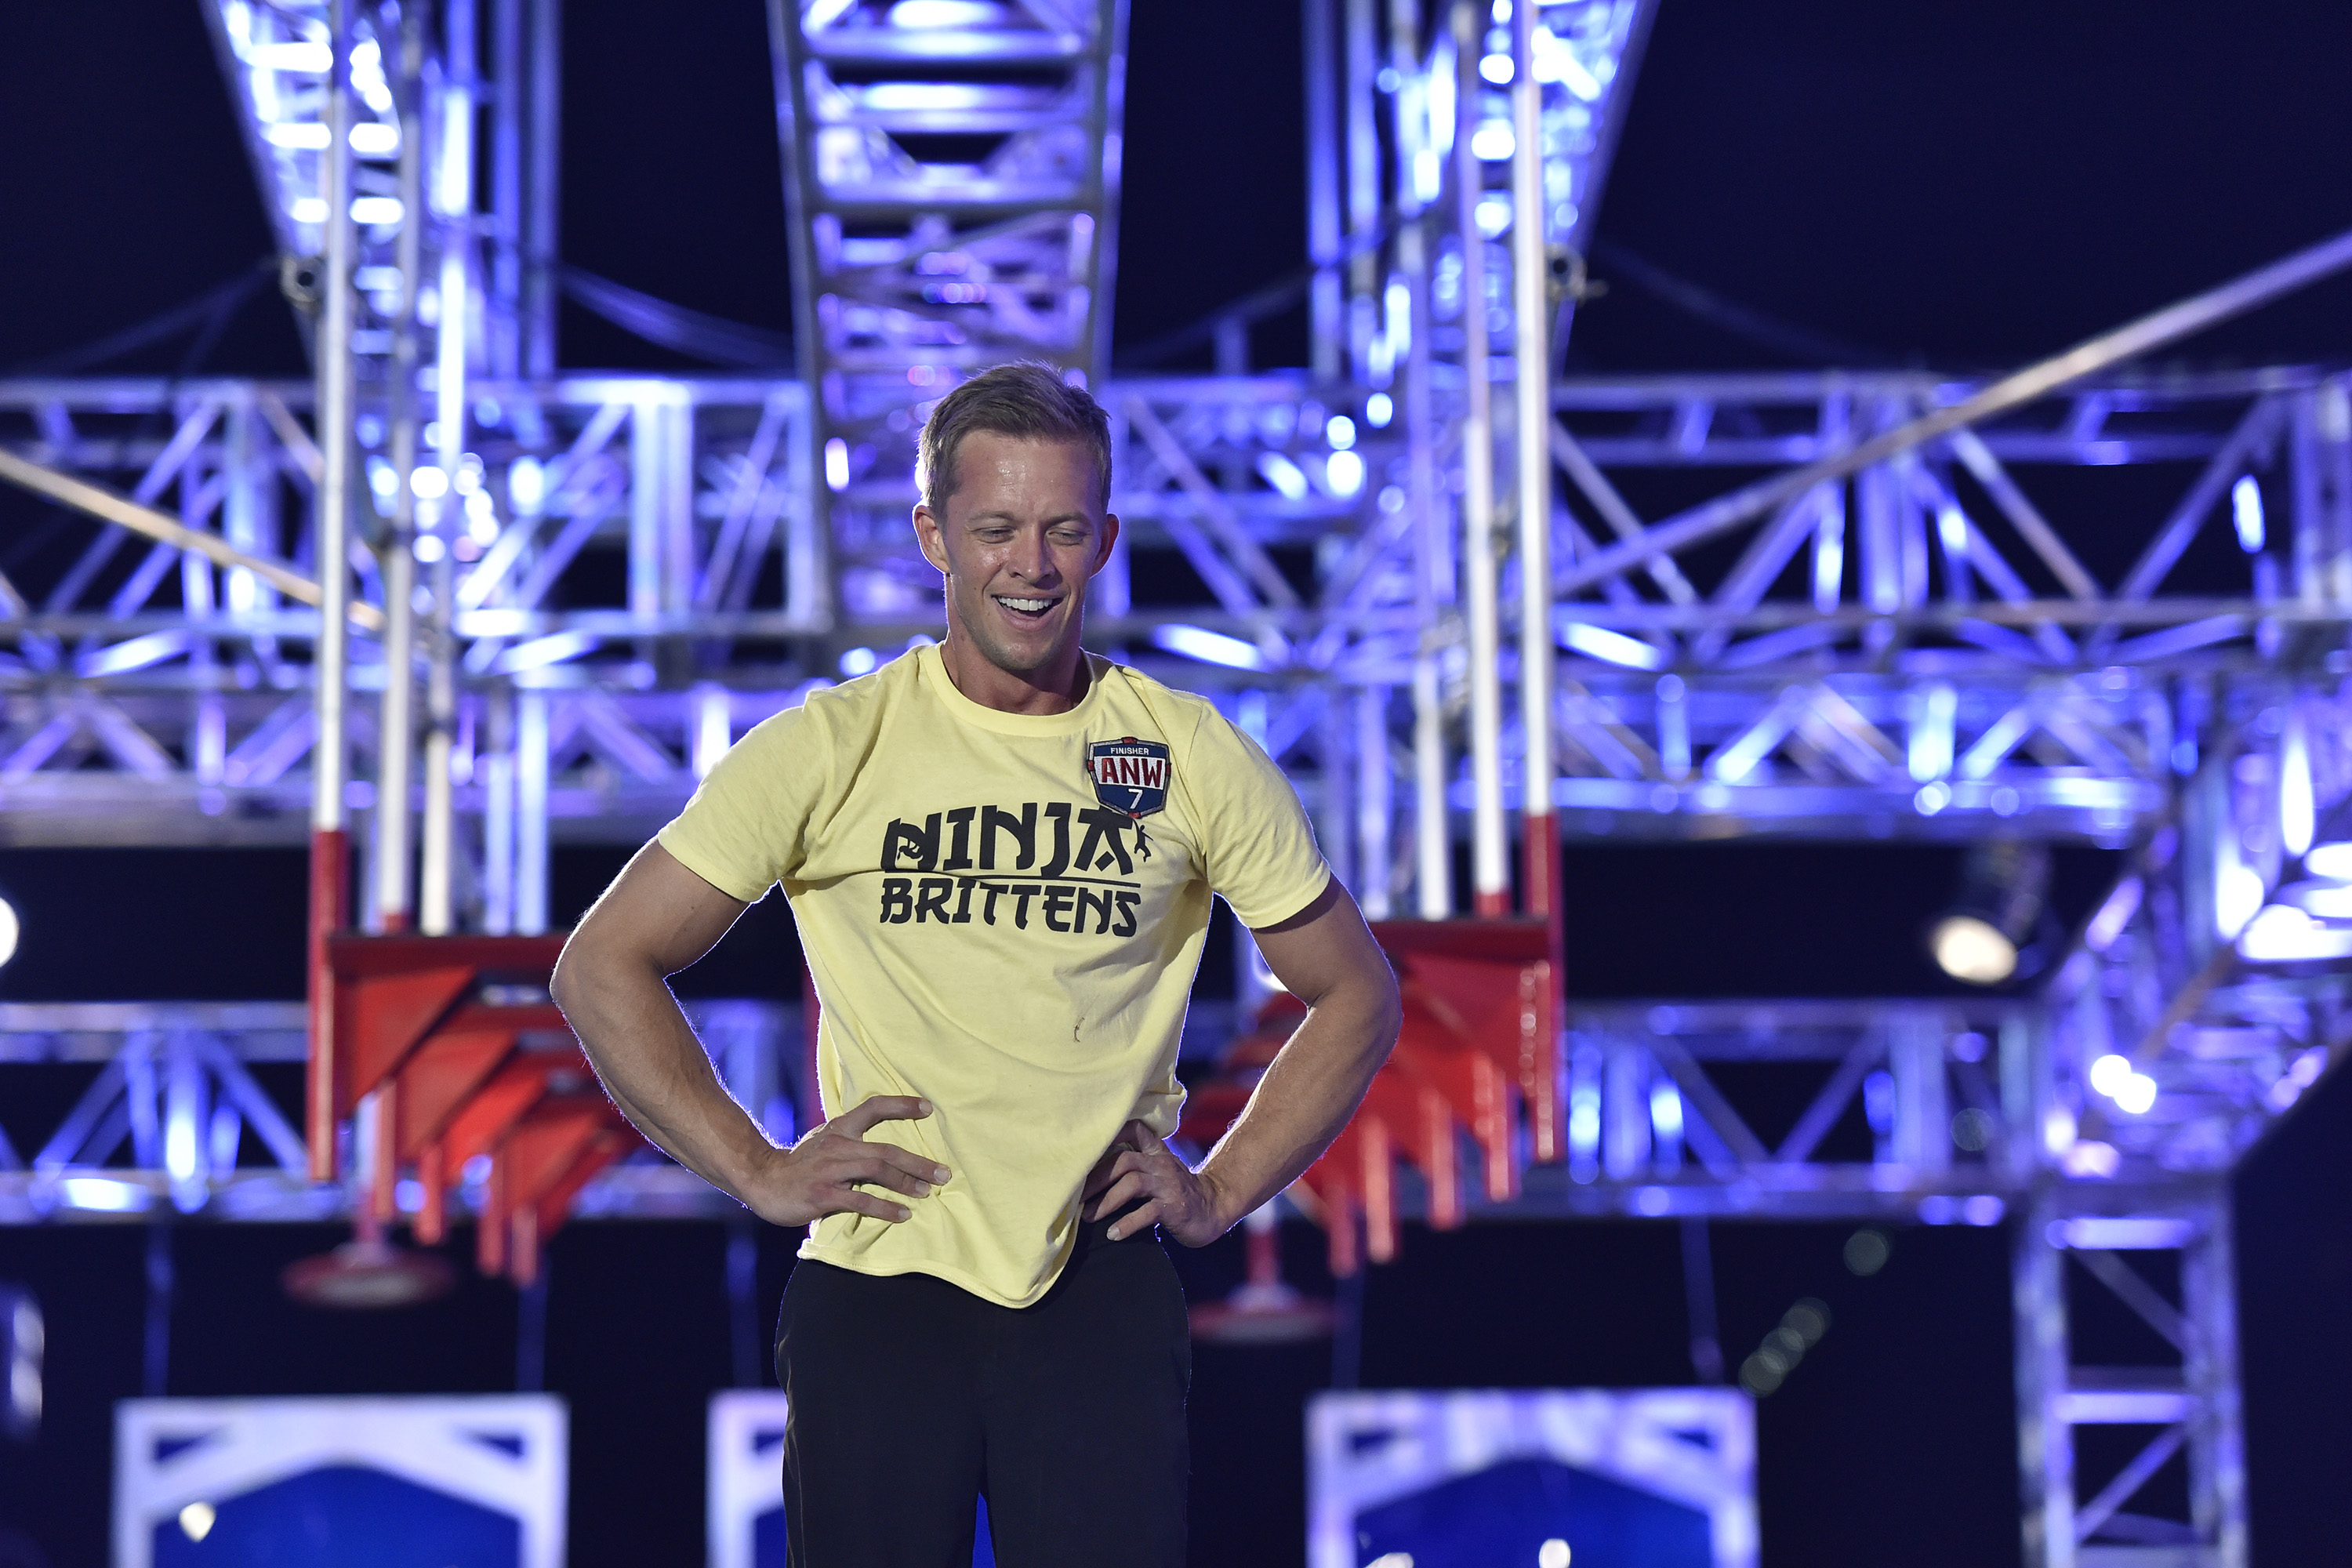 Fans Are Trying to Raise $1 Million for the 'Other' American Ninja Warrior